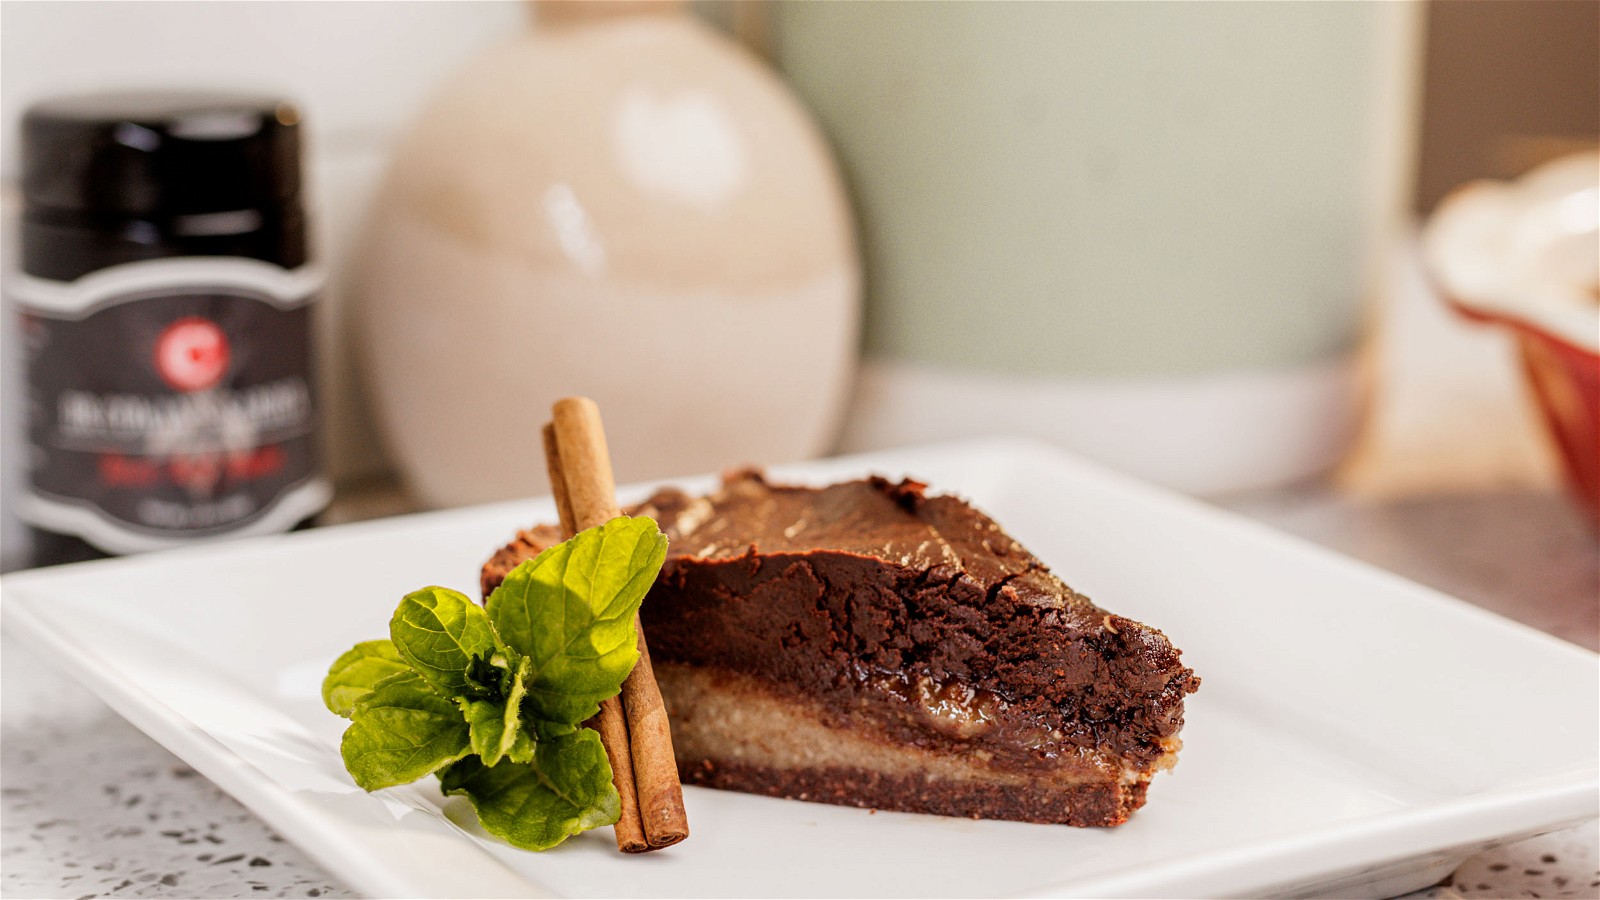 Image of Nut Butter Chocolate Pie